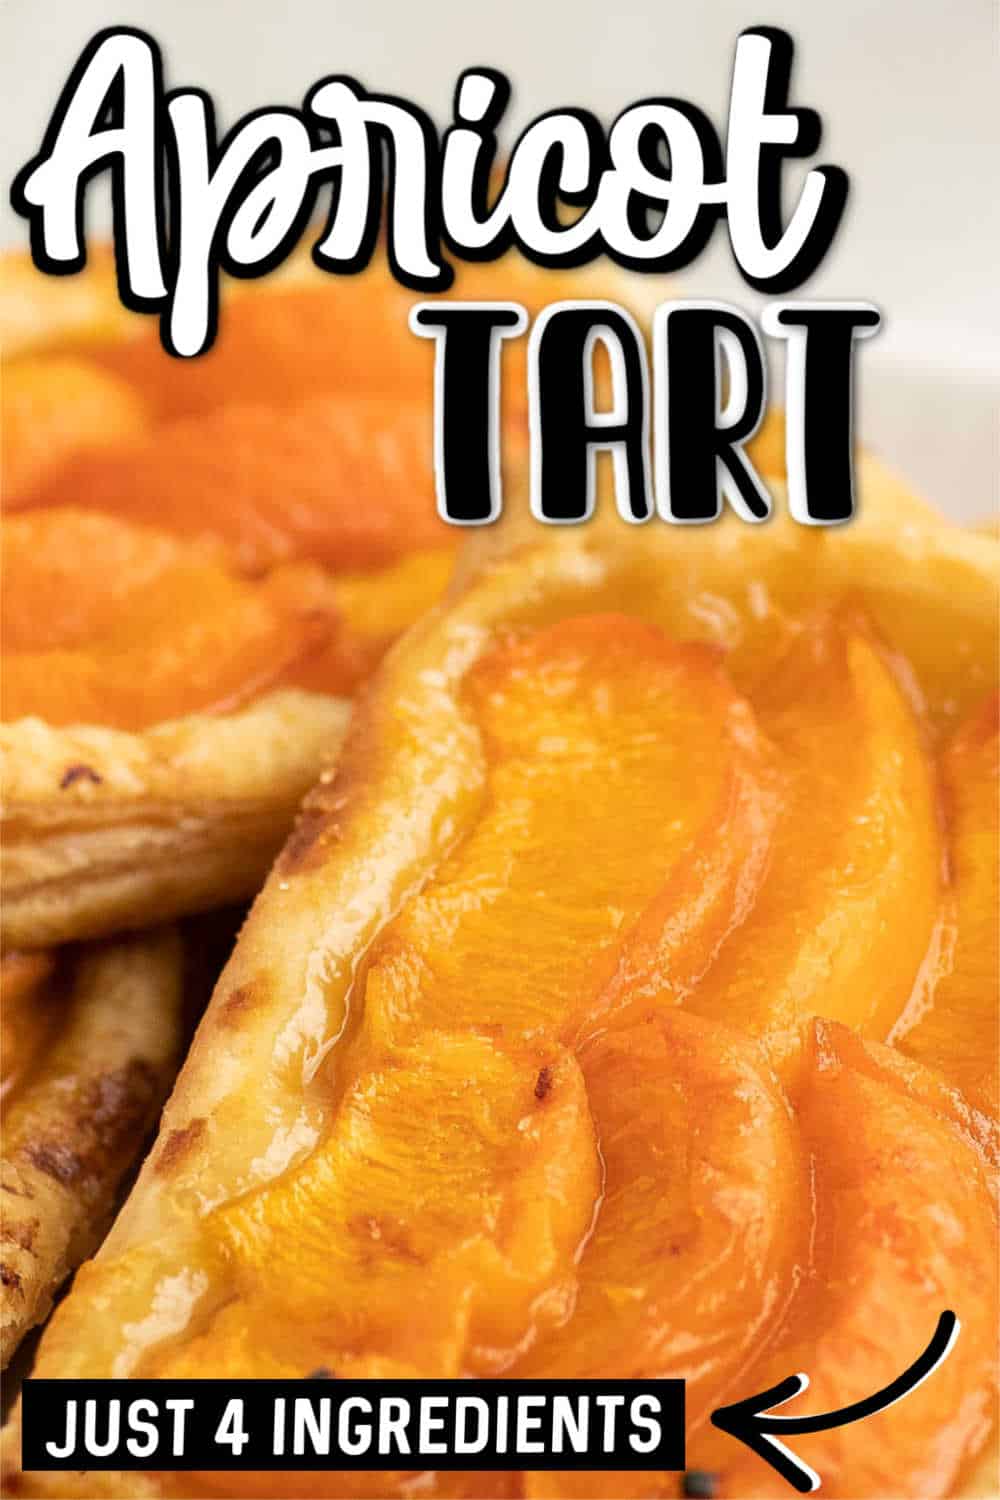 A buttery, flakey puff pastry topped with fresh, sweet apricots and baked to perfection. 4 simple ingredients make up this easy, rustic European dessert. Perfect with a scoop of vanilla ice cream #cheerfulcook #tart #apricot #baking via @cheerfulcook